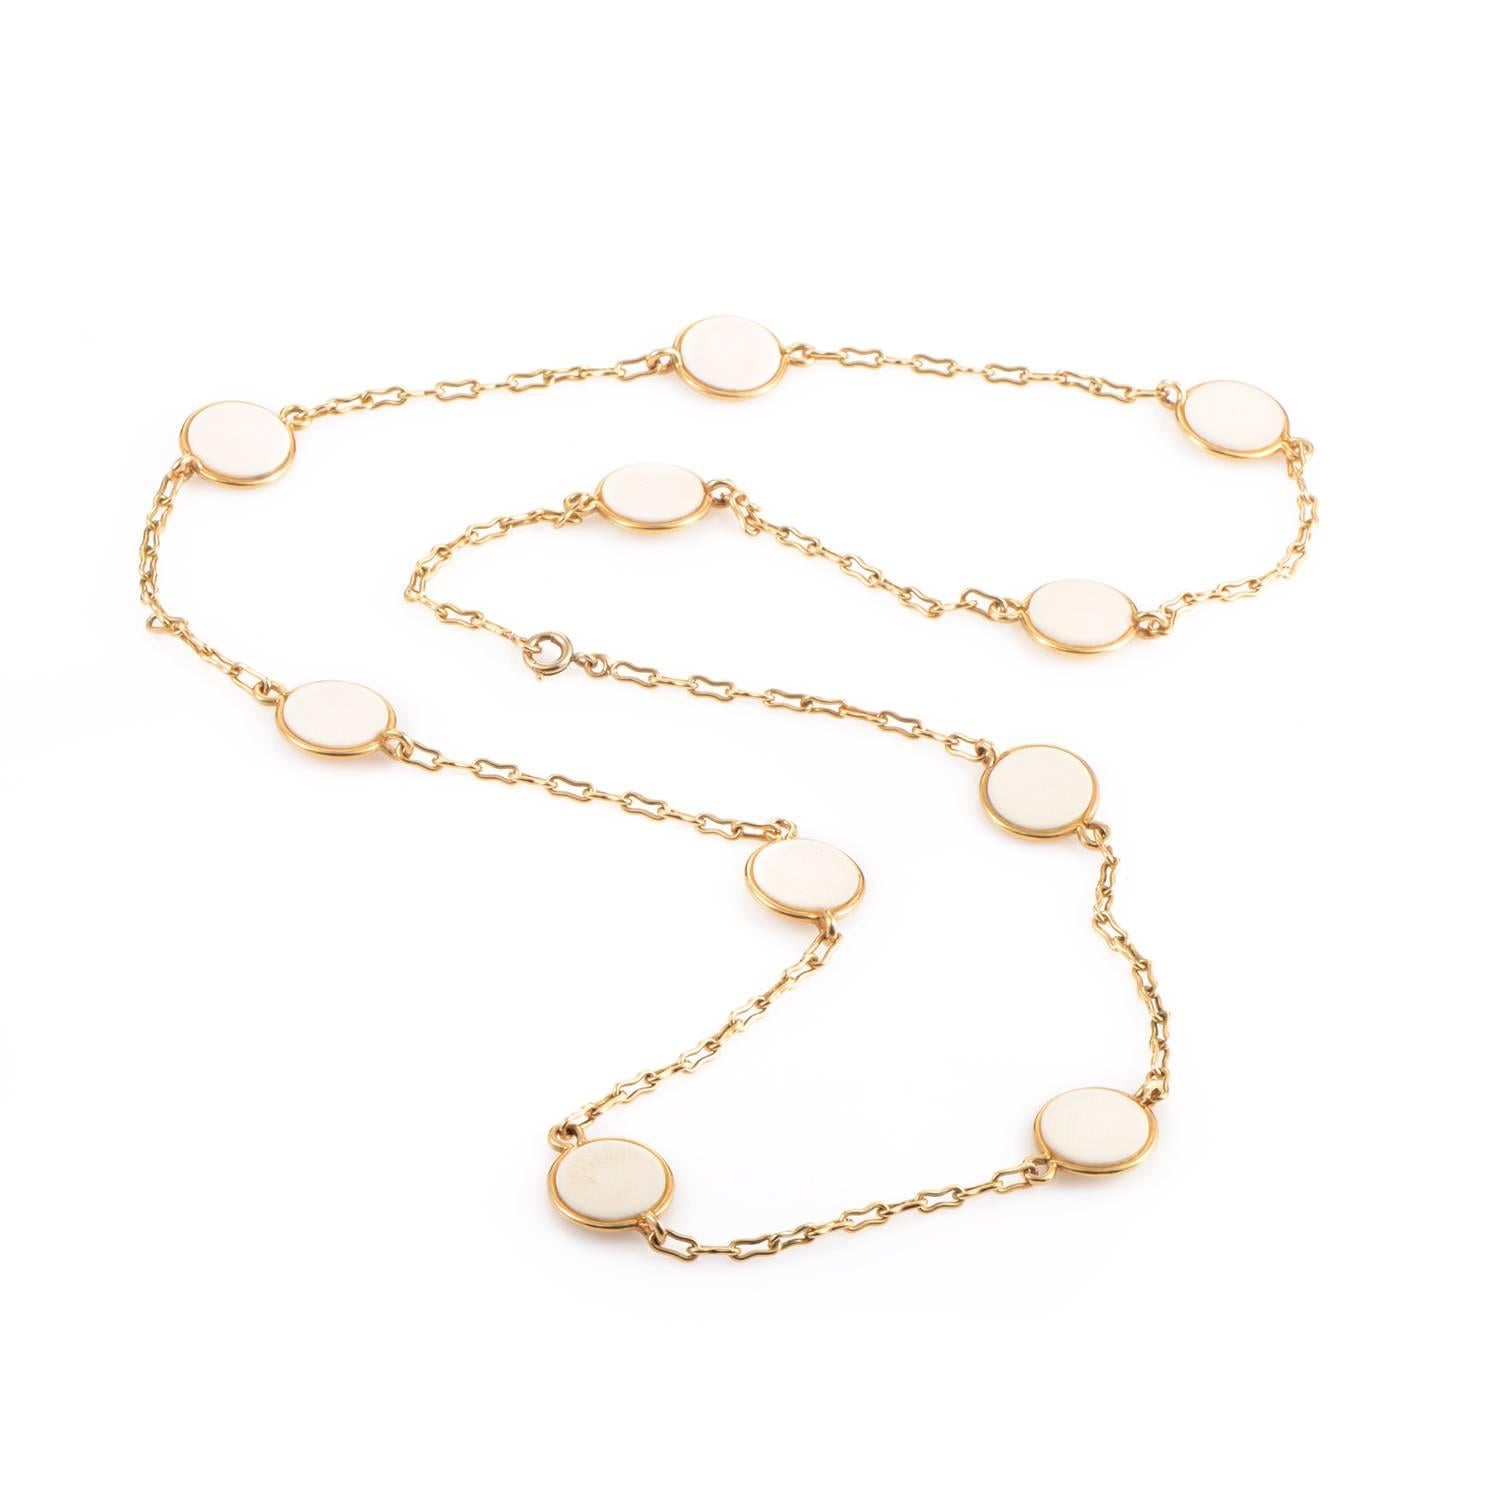 A simple yet sophisticated piece that is uncomplicated yet nuanced in its design, this vintage 1970's 18K yellow gold and rounded ivory necklace by Van Cleef and Arpels is a gorgeous example of meticulous craftsmanship.<br />Ivory Dimensions: 15 x